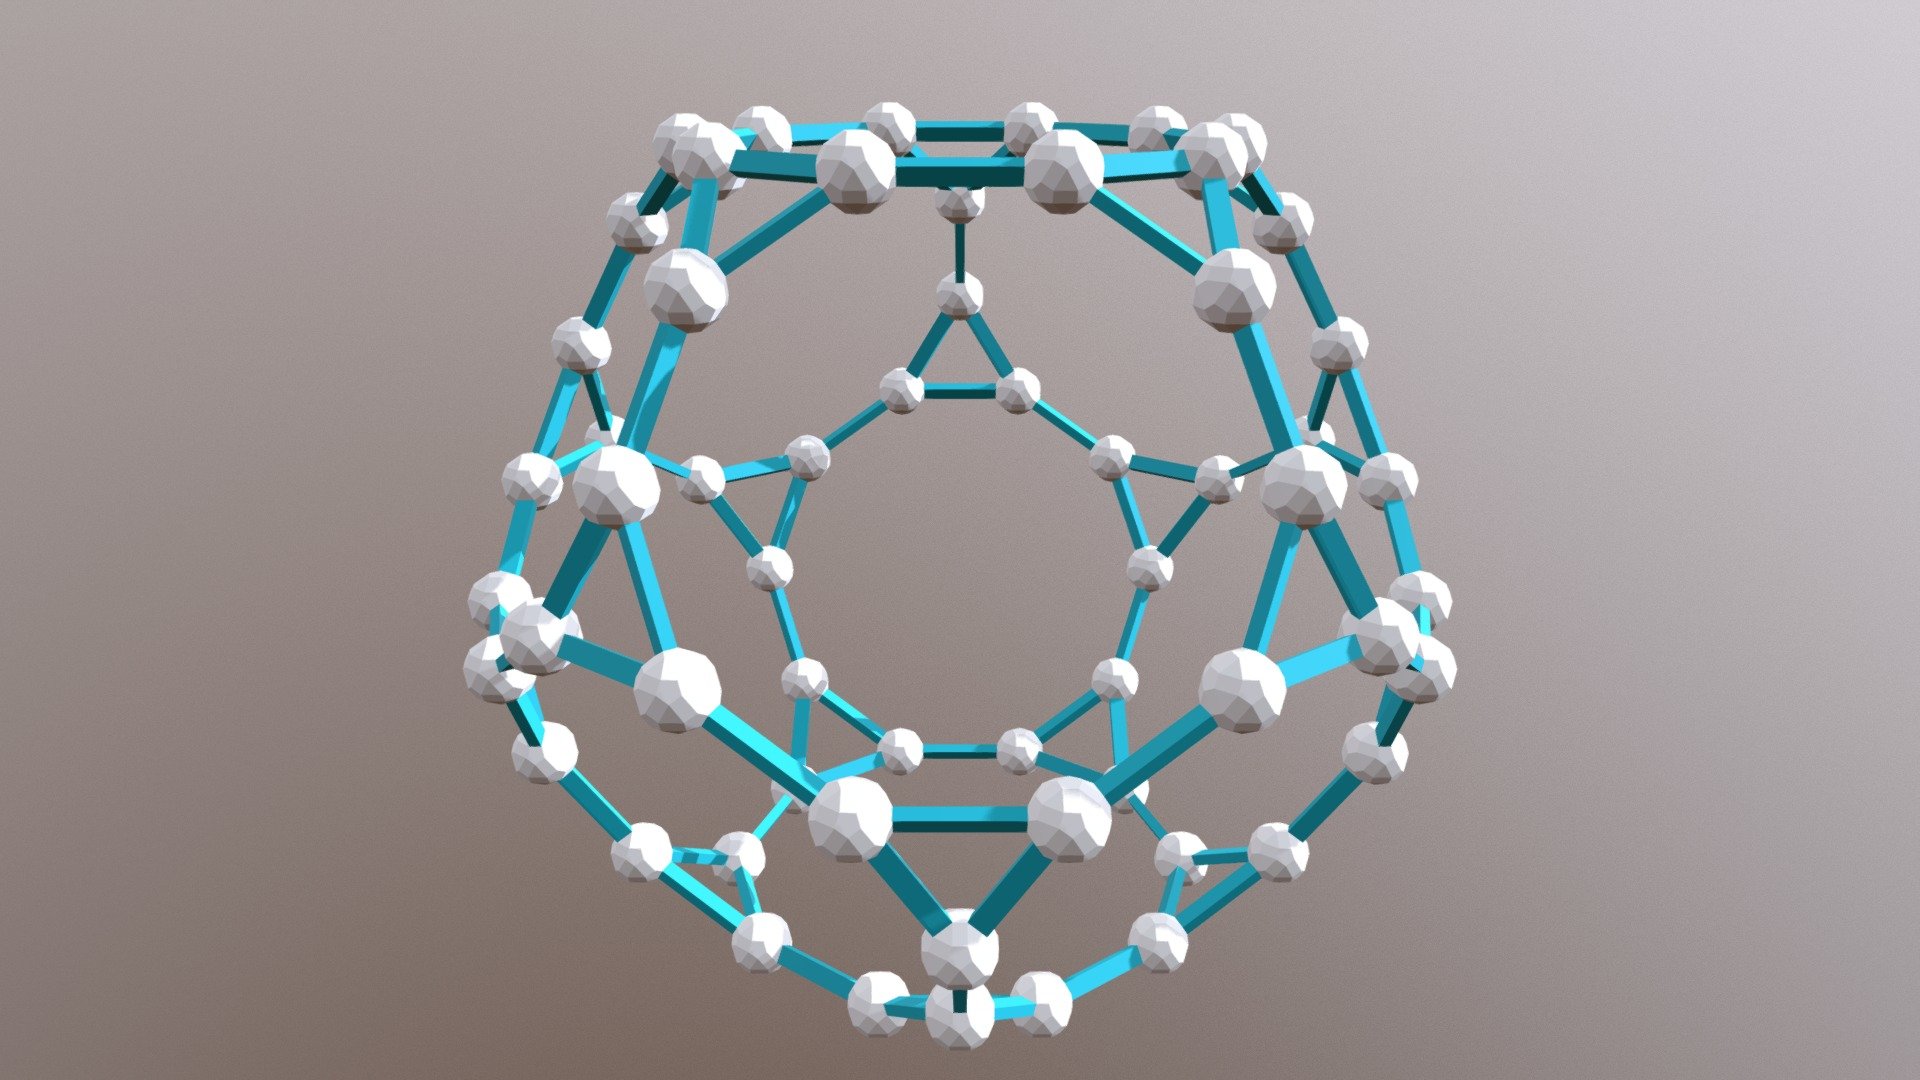 60 90 2 Truncated Dodecahedron